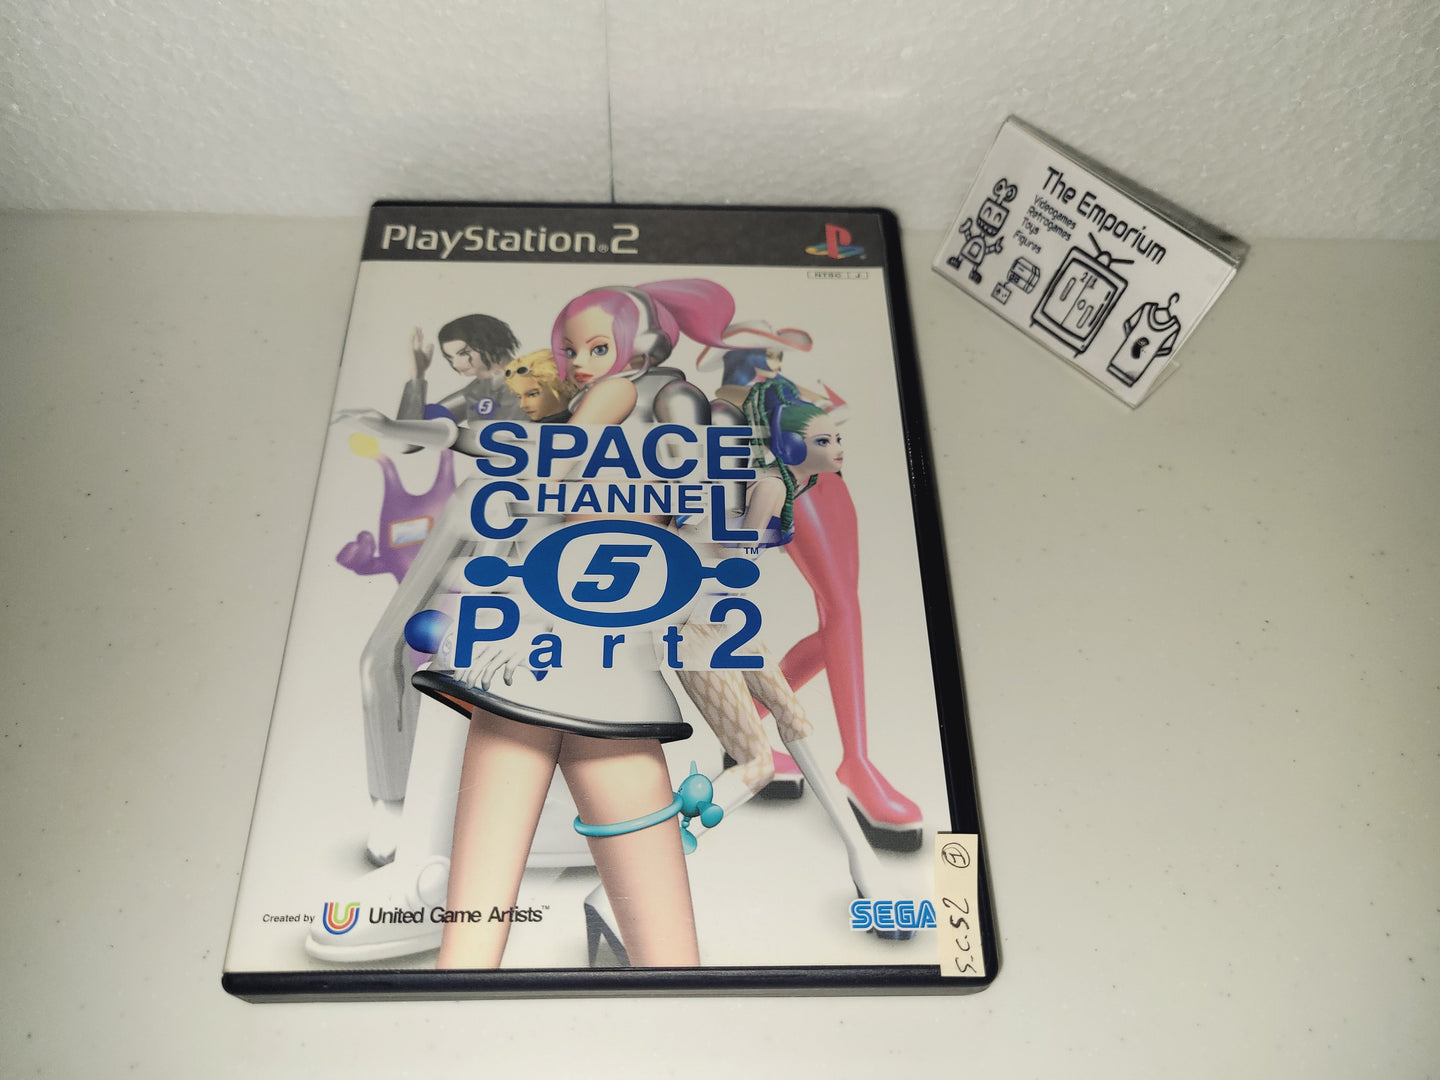 Space Channel 5 Part 2 - Sony playstation 2